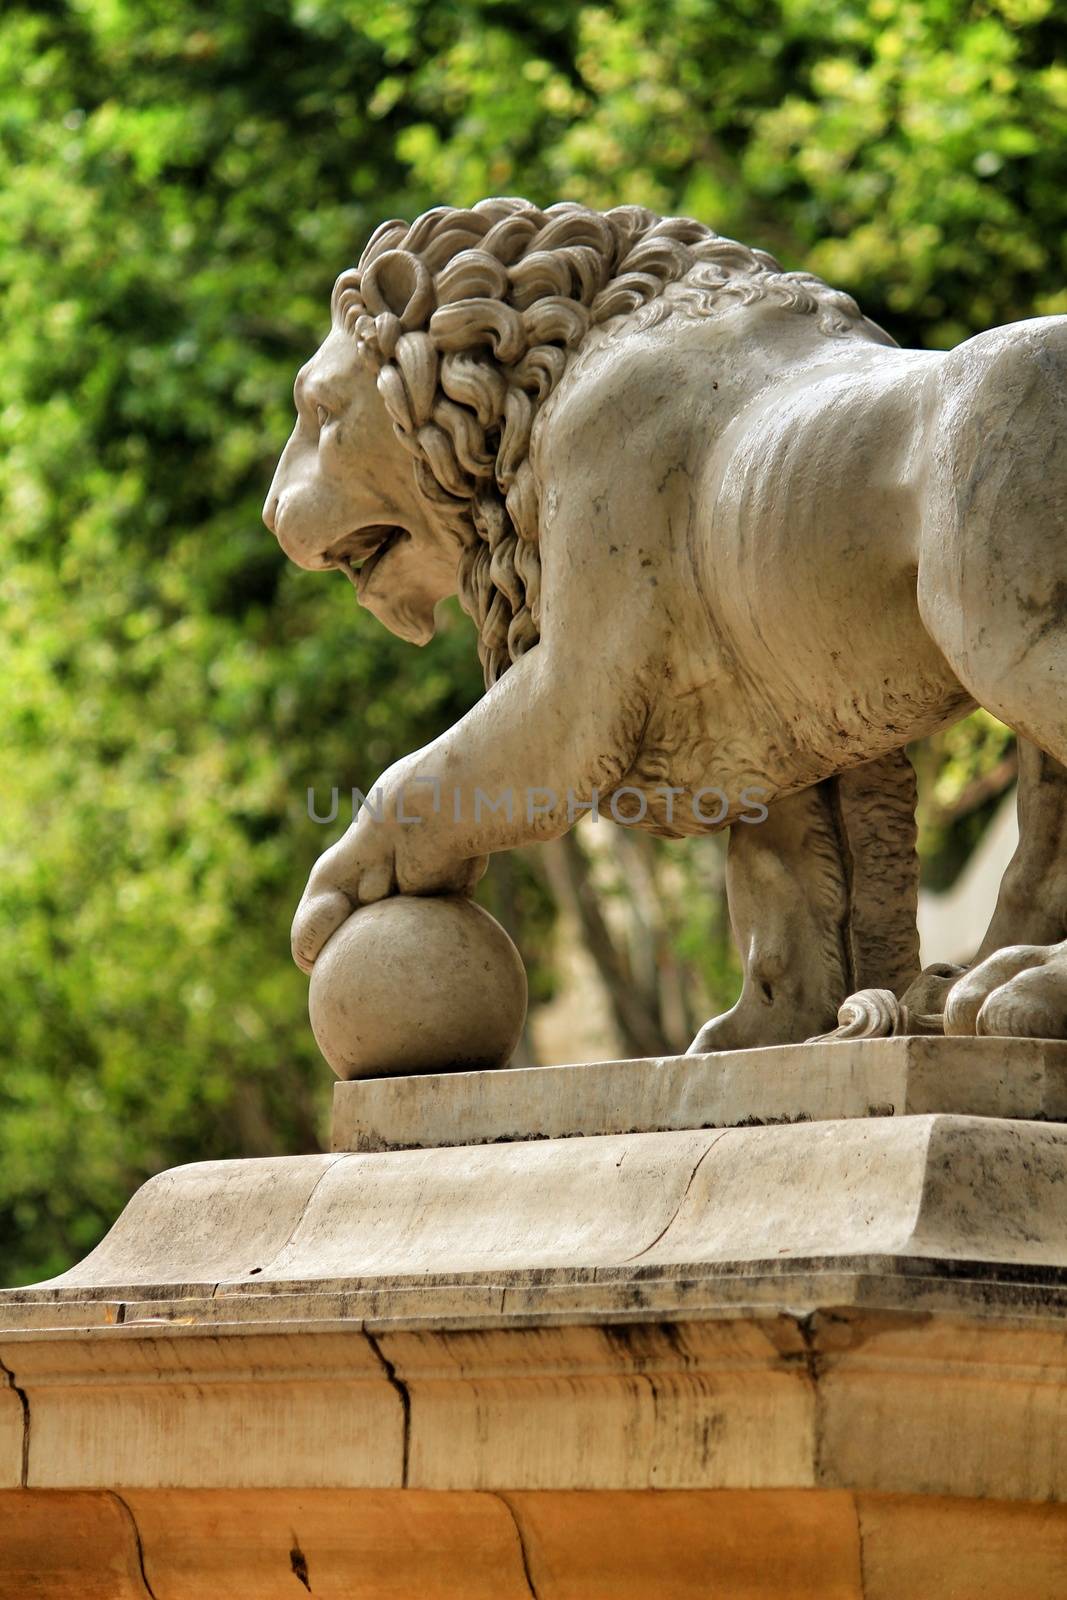 Lion sculpture at the end of Explanada promenade by soniabonet